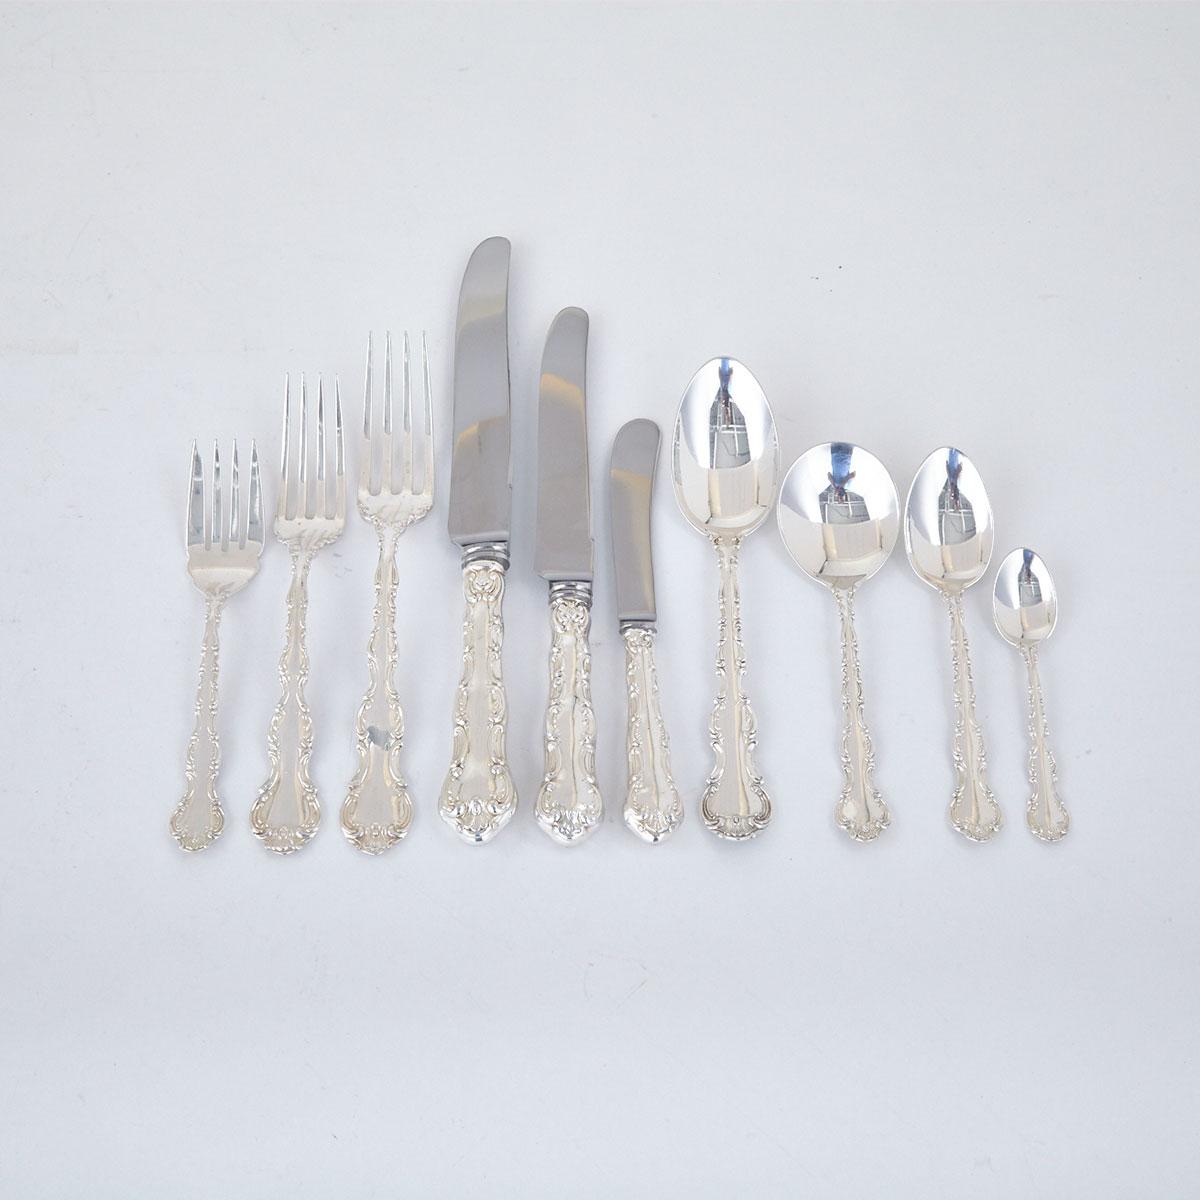 Canadian Silver ‘Pompadour’ Pattern Flatware Service, Henry Birks & Sons, Montreal, Que., 20th century